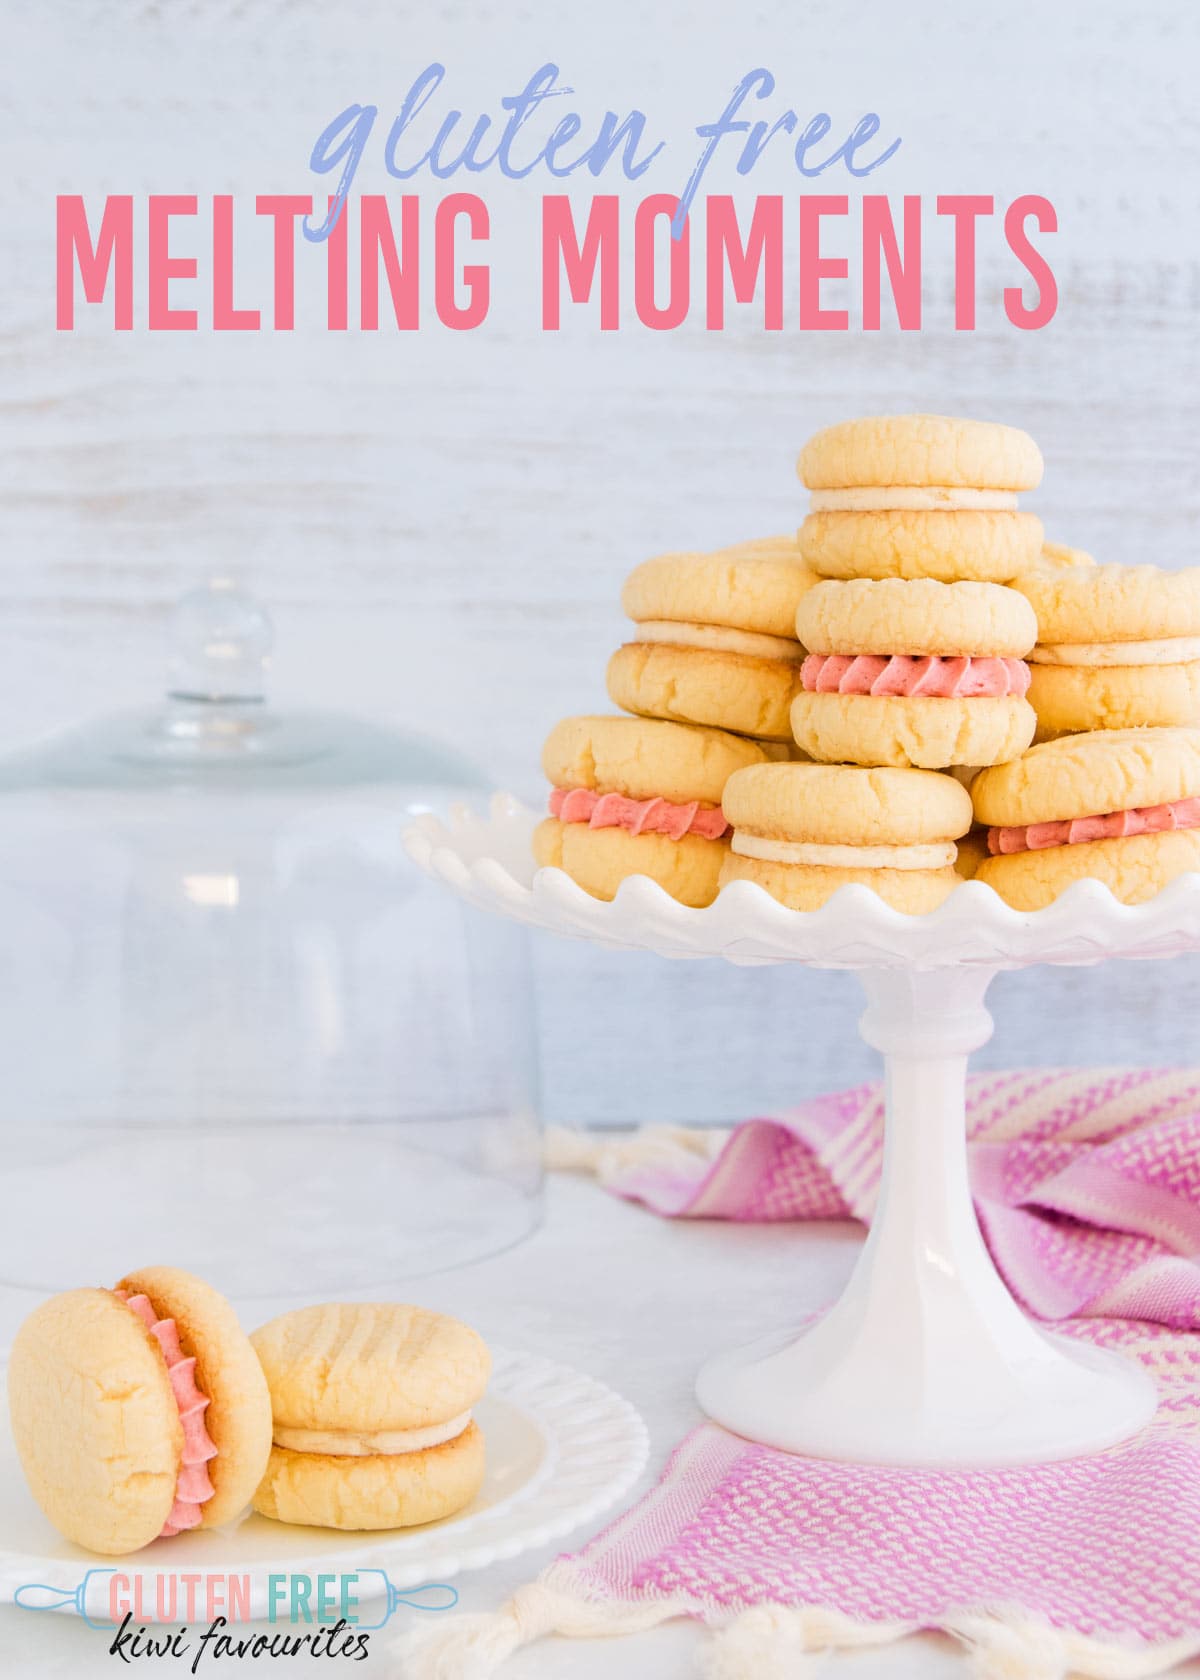 Biscuits filled with pink and white buttercream on a white milk glass cake stand on a pale blue background, text overlay reads "gluten free melting moments"